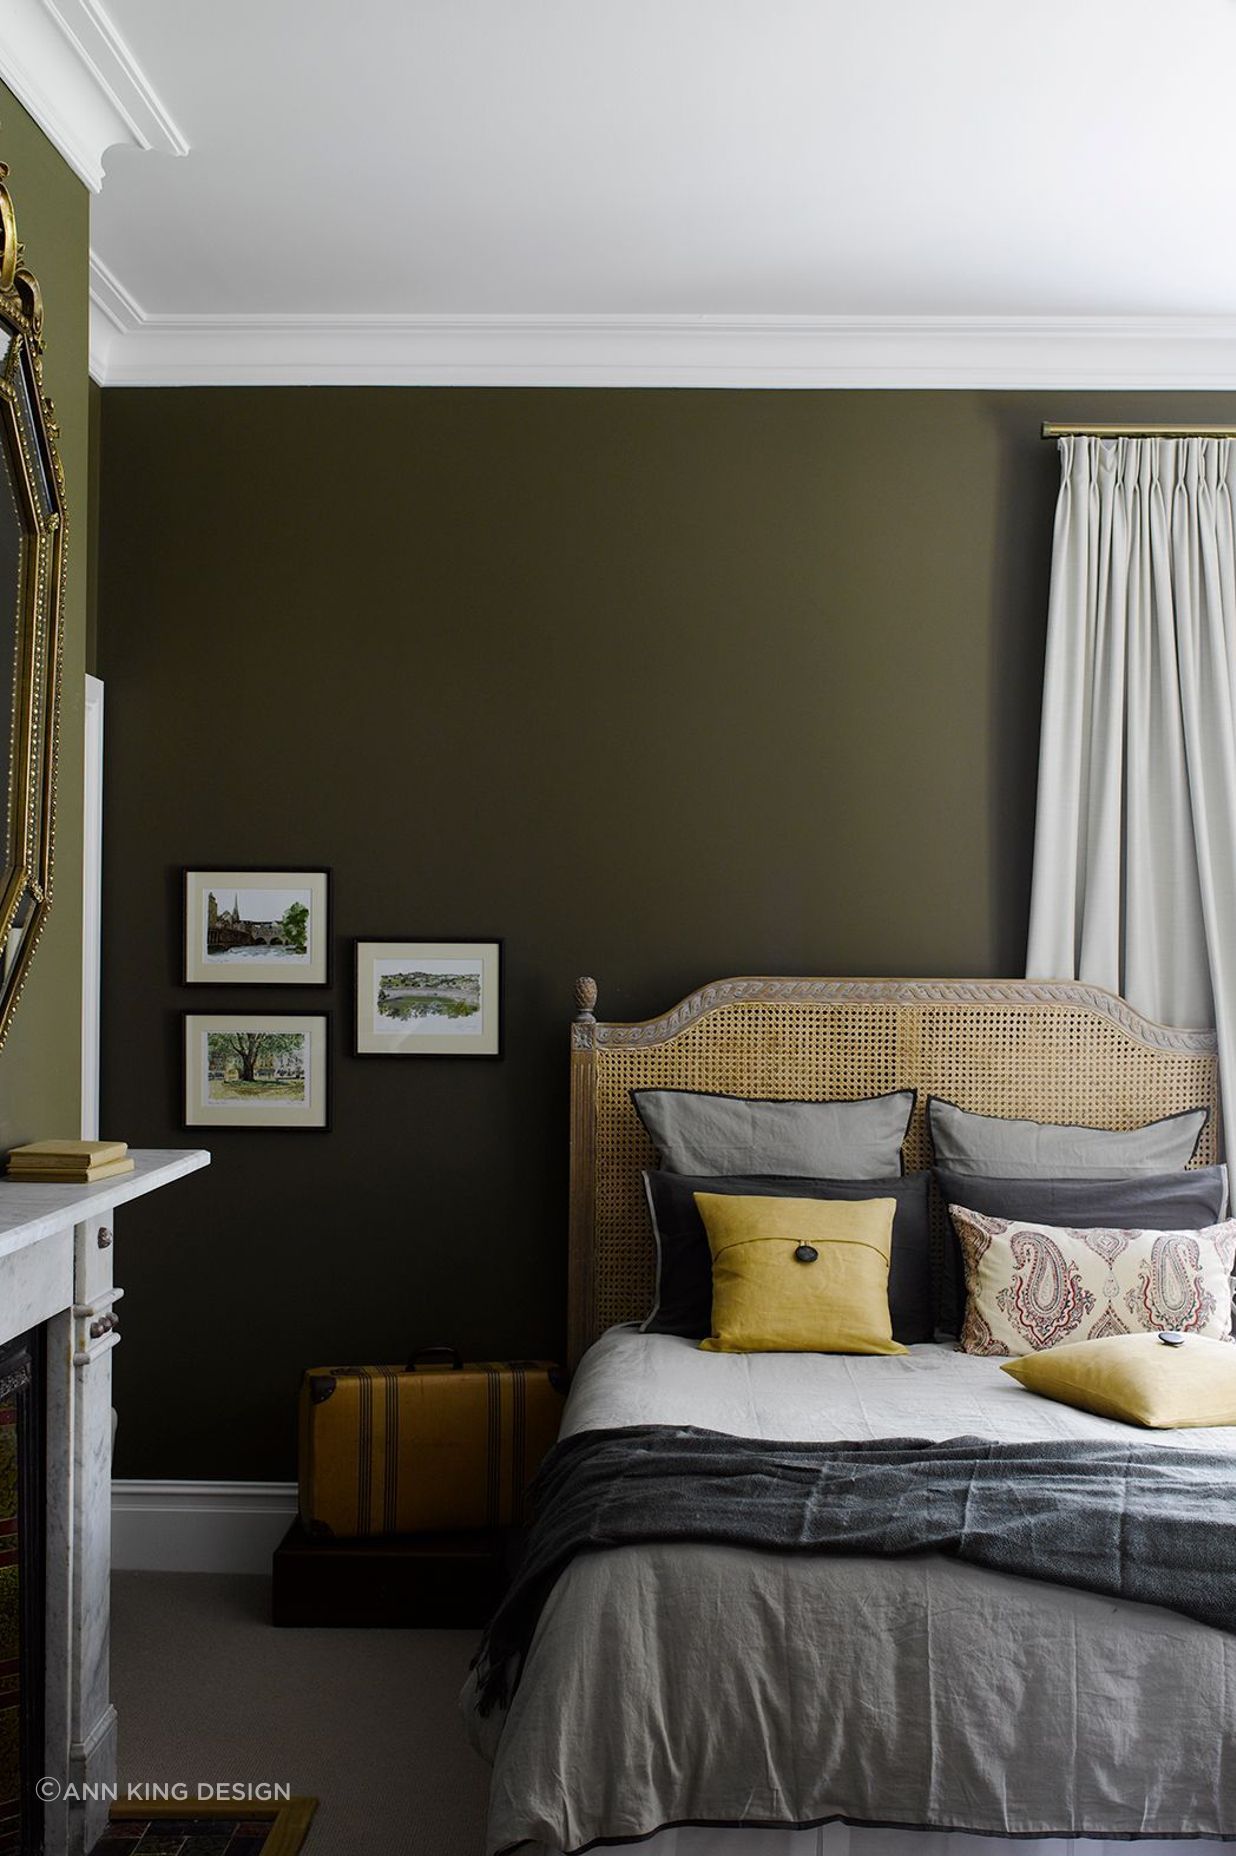 Wood tones and greens will be popular in colour palettes this year.